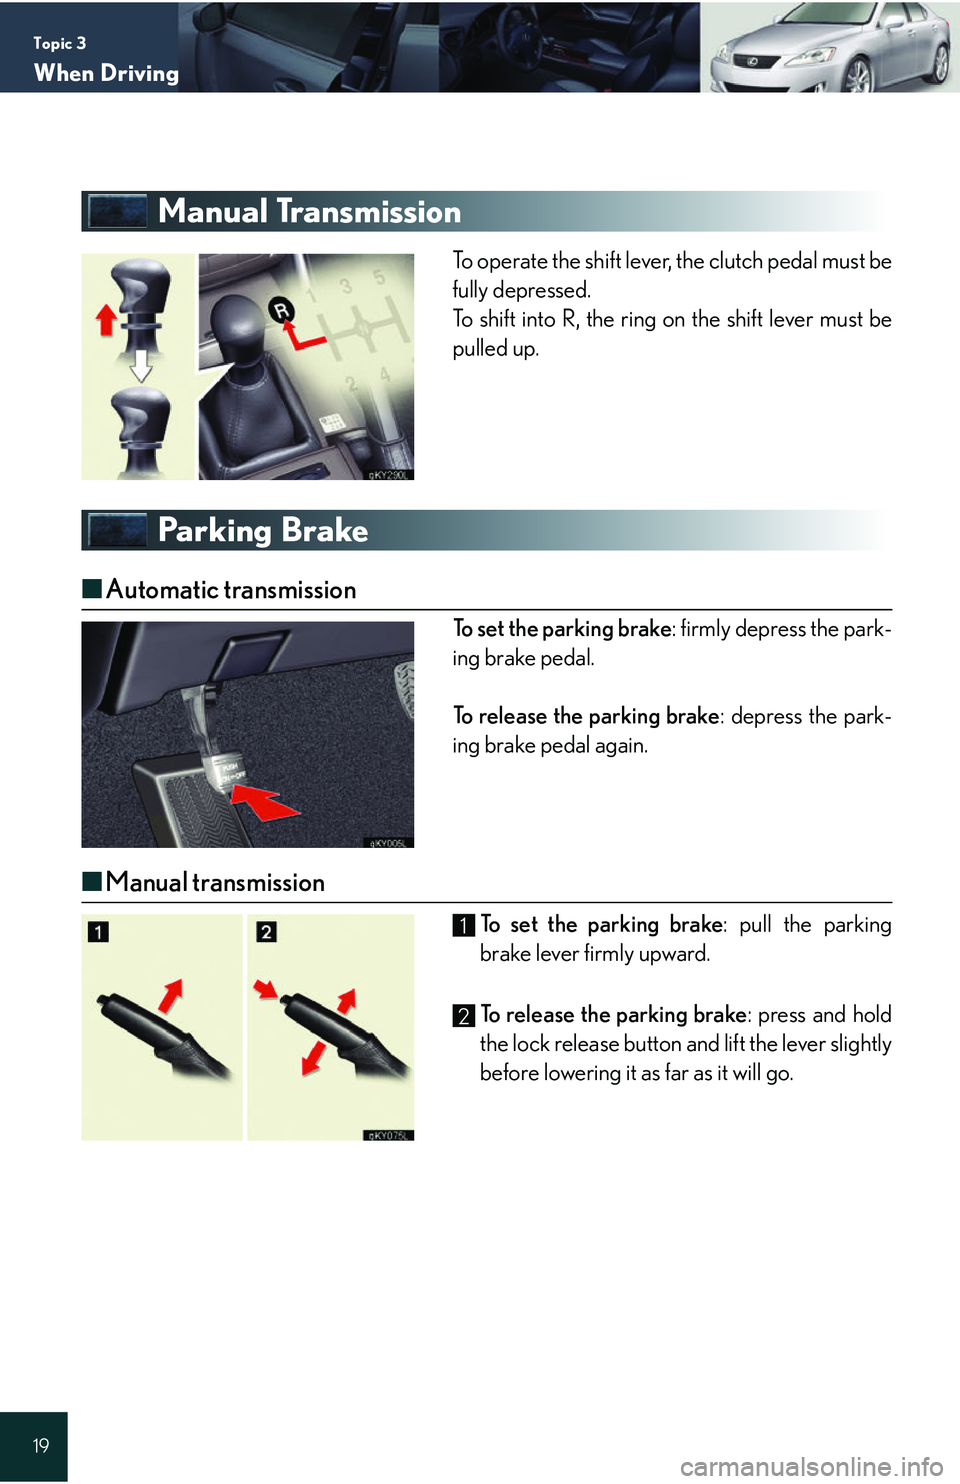 Lexus IS250 2006  Lexus Parking Assist-sensor / LEXUS 2006 IS350/250 QUICK REFERENCE GUIDE Topic 3
When Driving
19
Manual Transmission
To operate the shift lever, the clutch pedal must be
fully depressed.
To shift into R, the ring on the shift lever must be
pulled up.
Parking Brake
■Autom